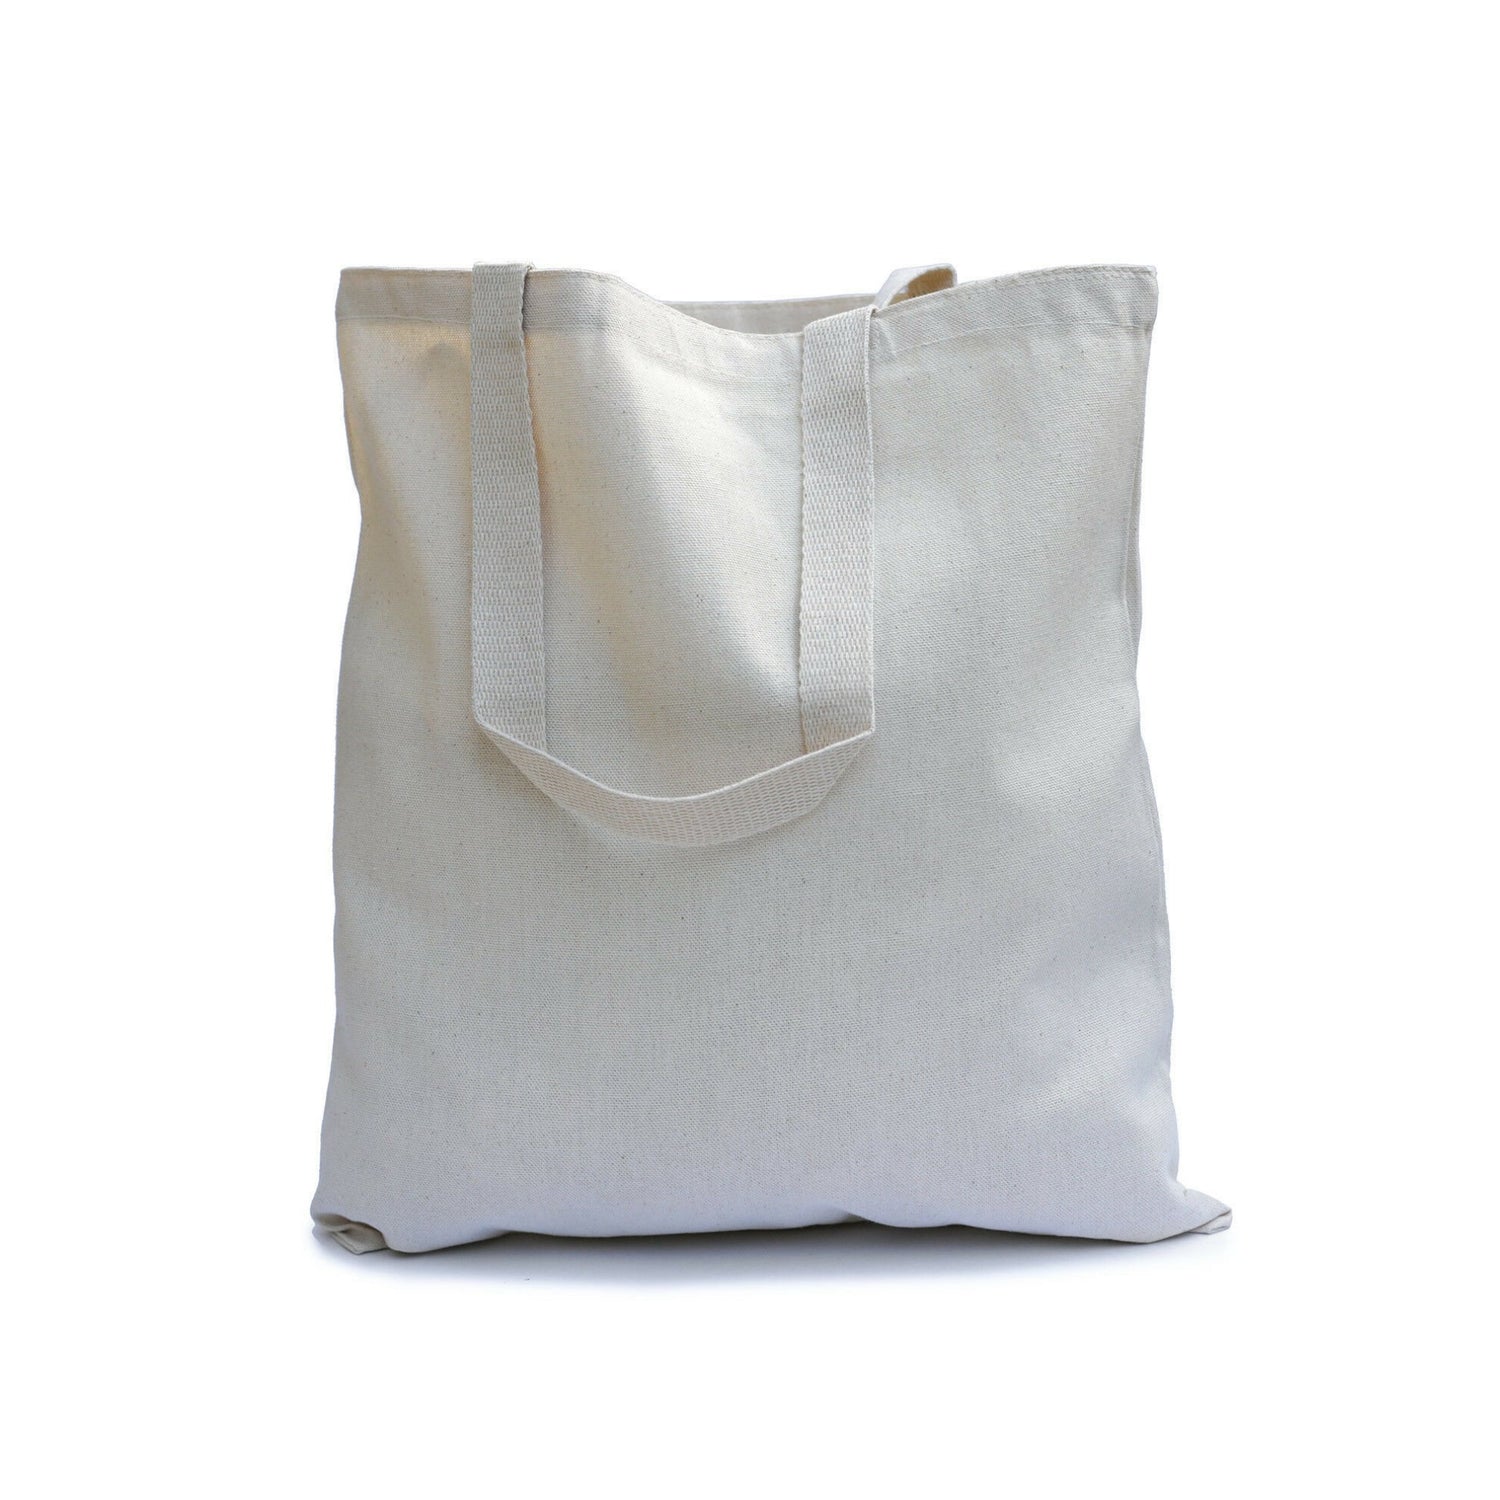 Blank Canvas Cotton Tote Bags Wholesale